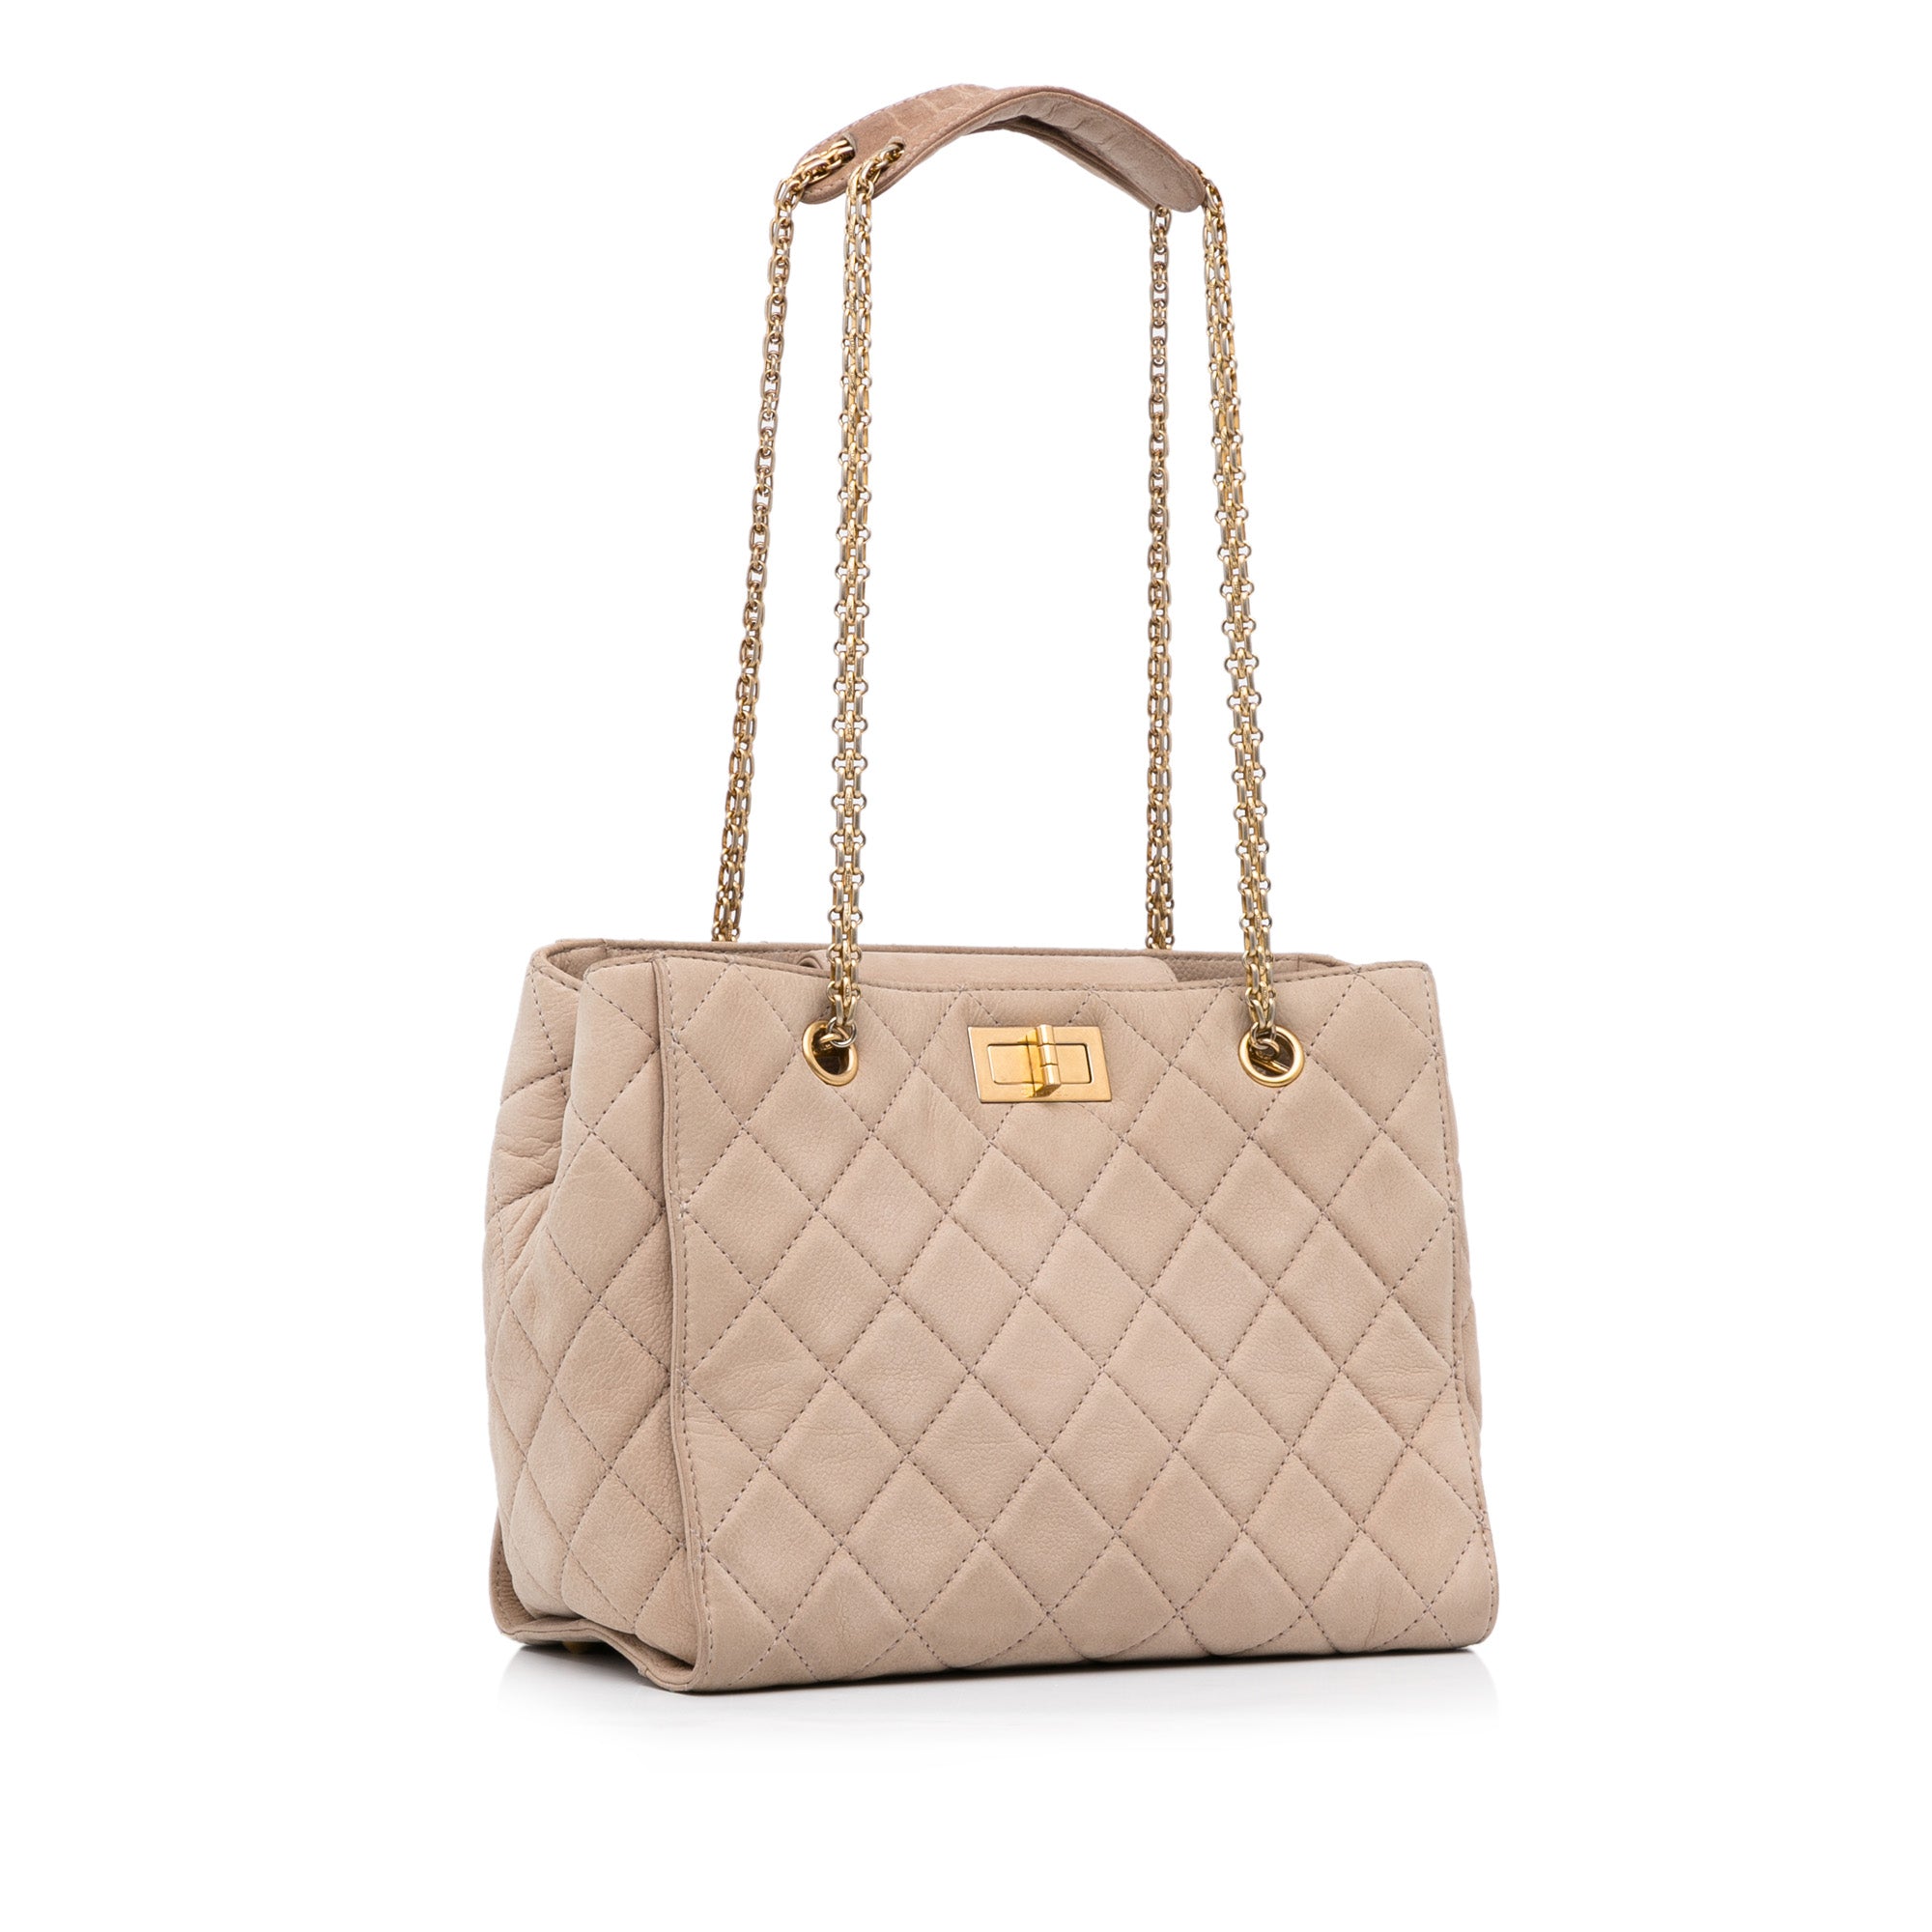 Chanel Reissue 225 Beige Calfskin Leather, Antique Gold Hardware, Preowned  in Dustbag - Julia Rose Boston